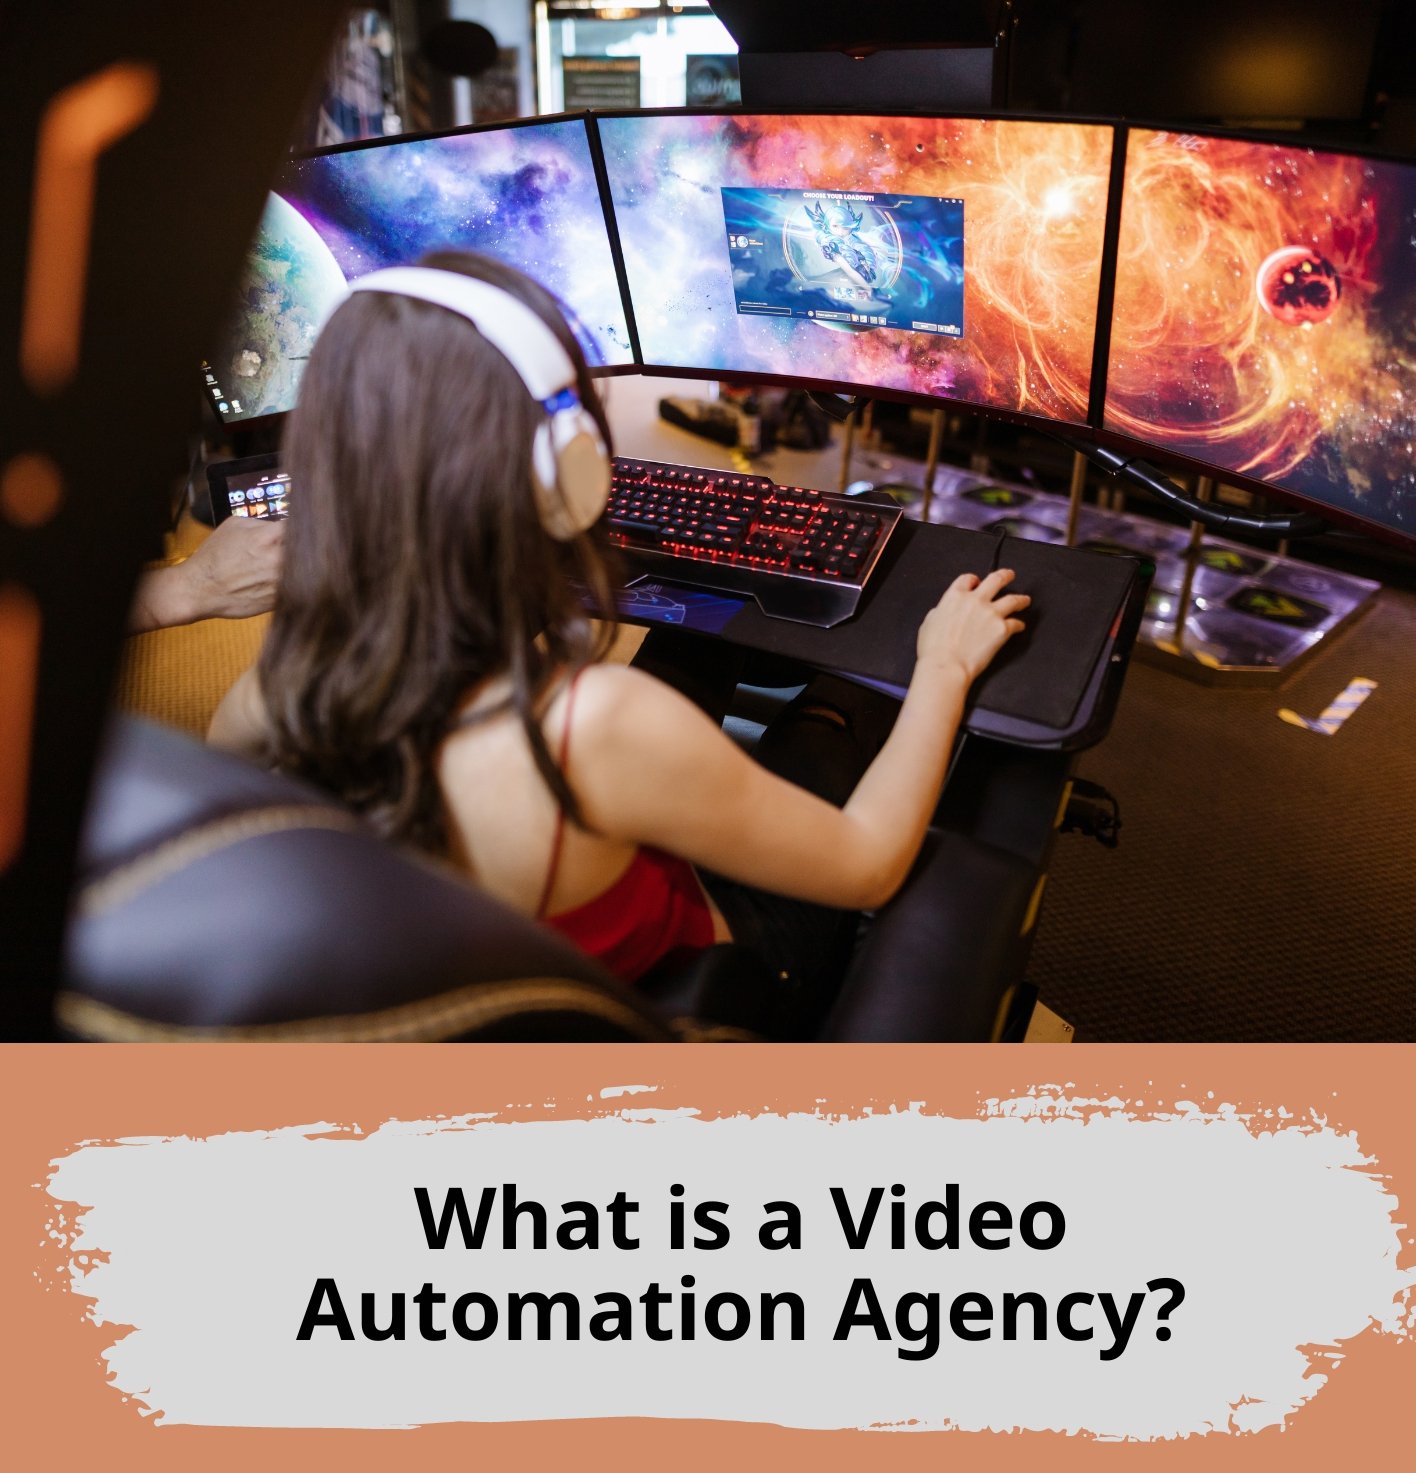 What is a Video Automation Agency?